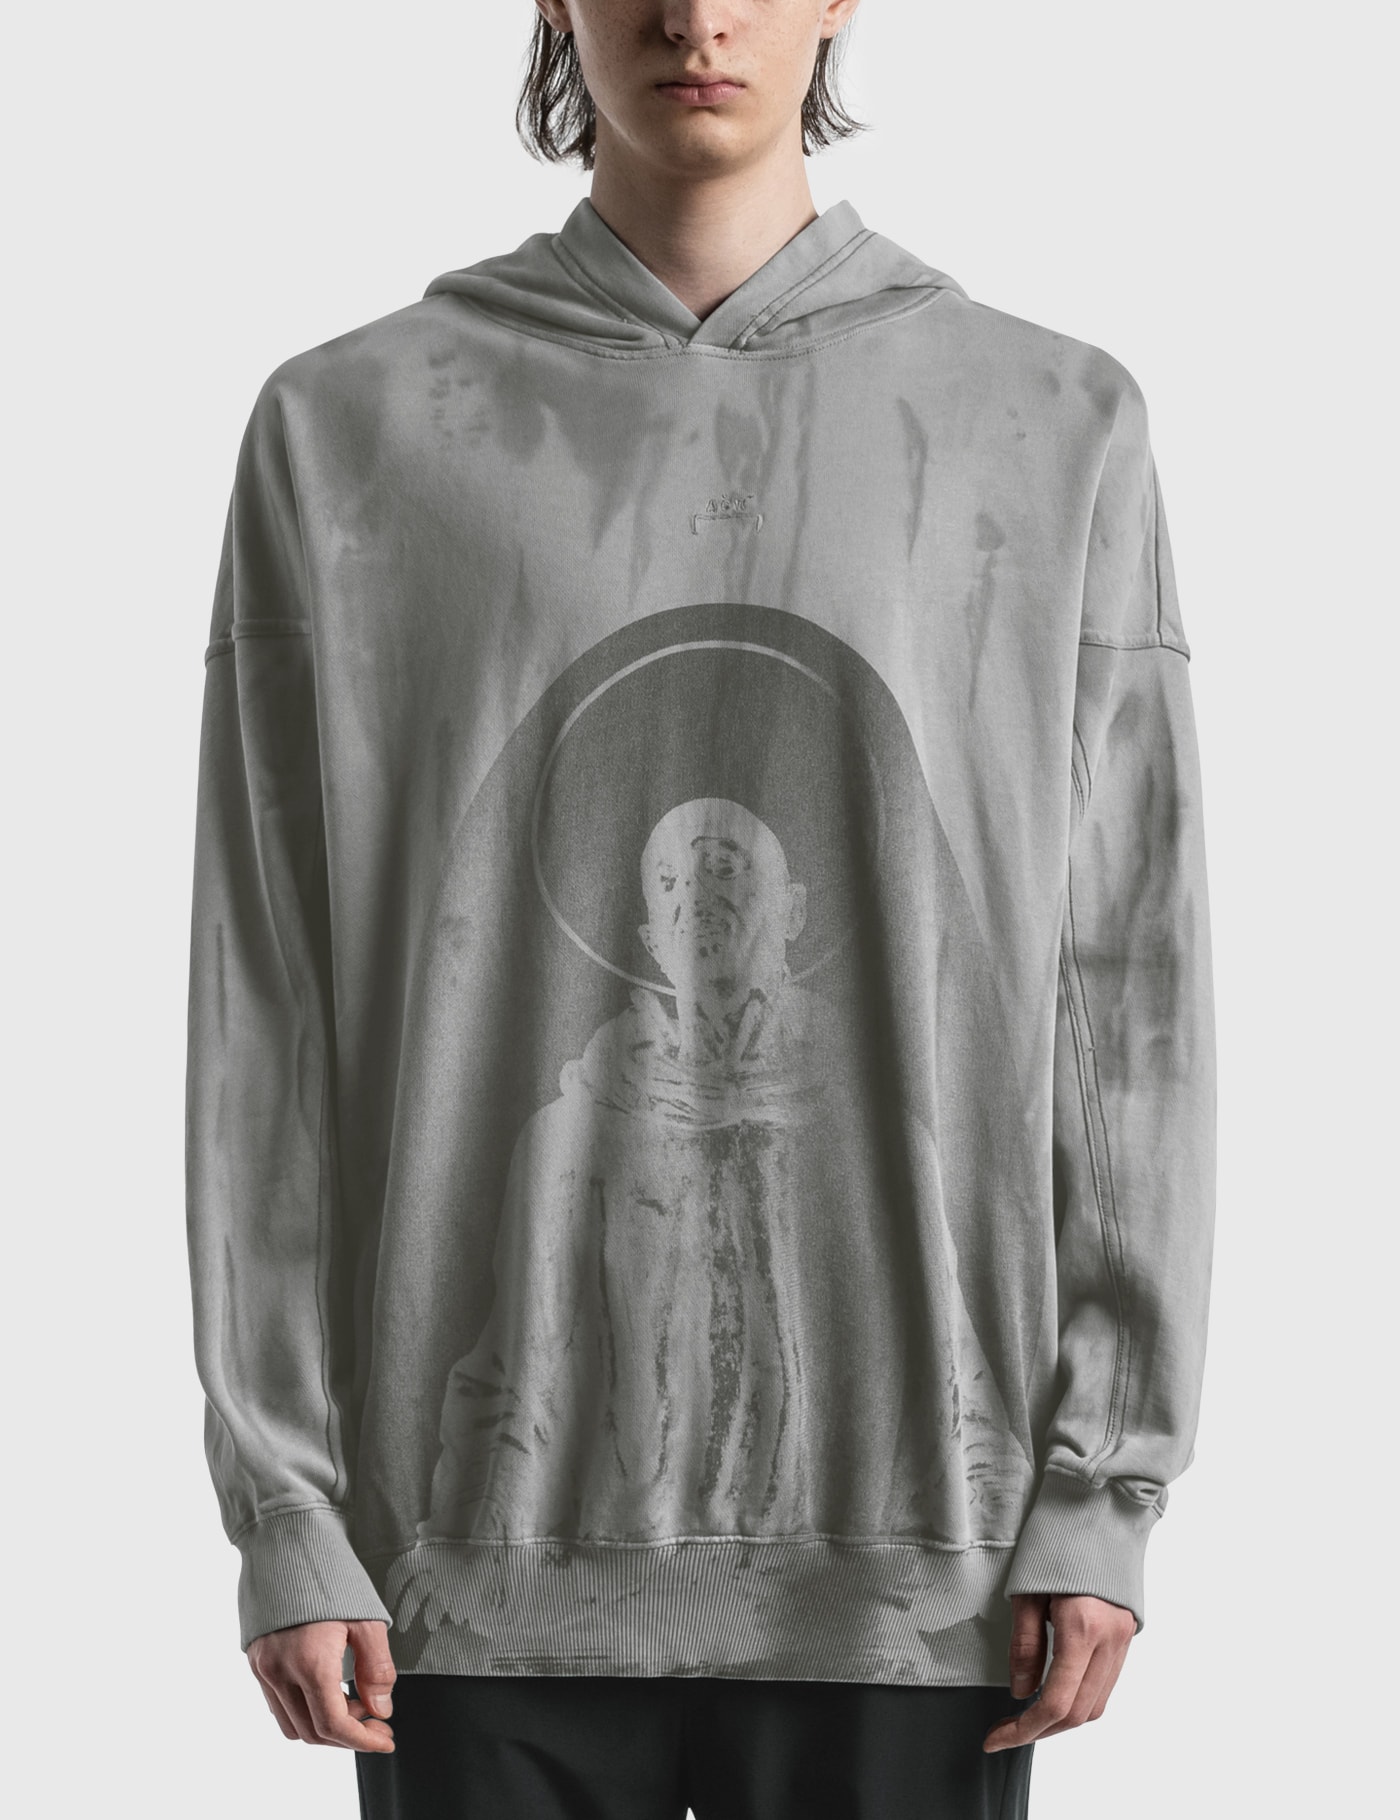 A-COLD-WALL* EROSION HOODIE